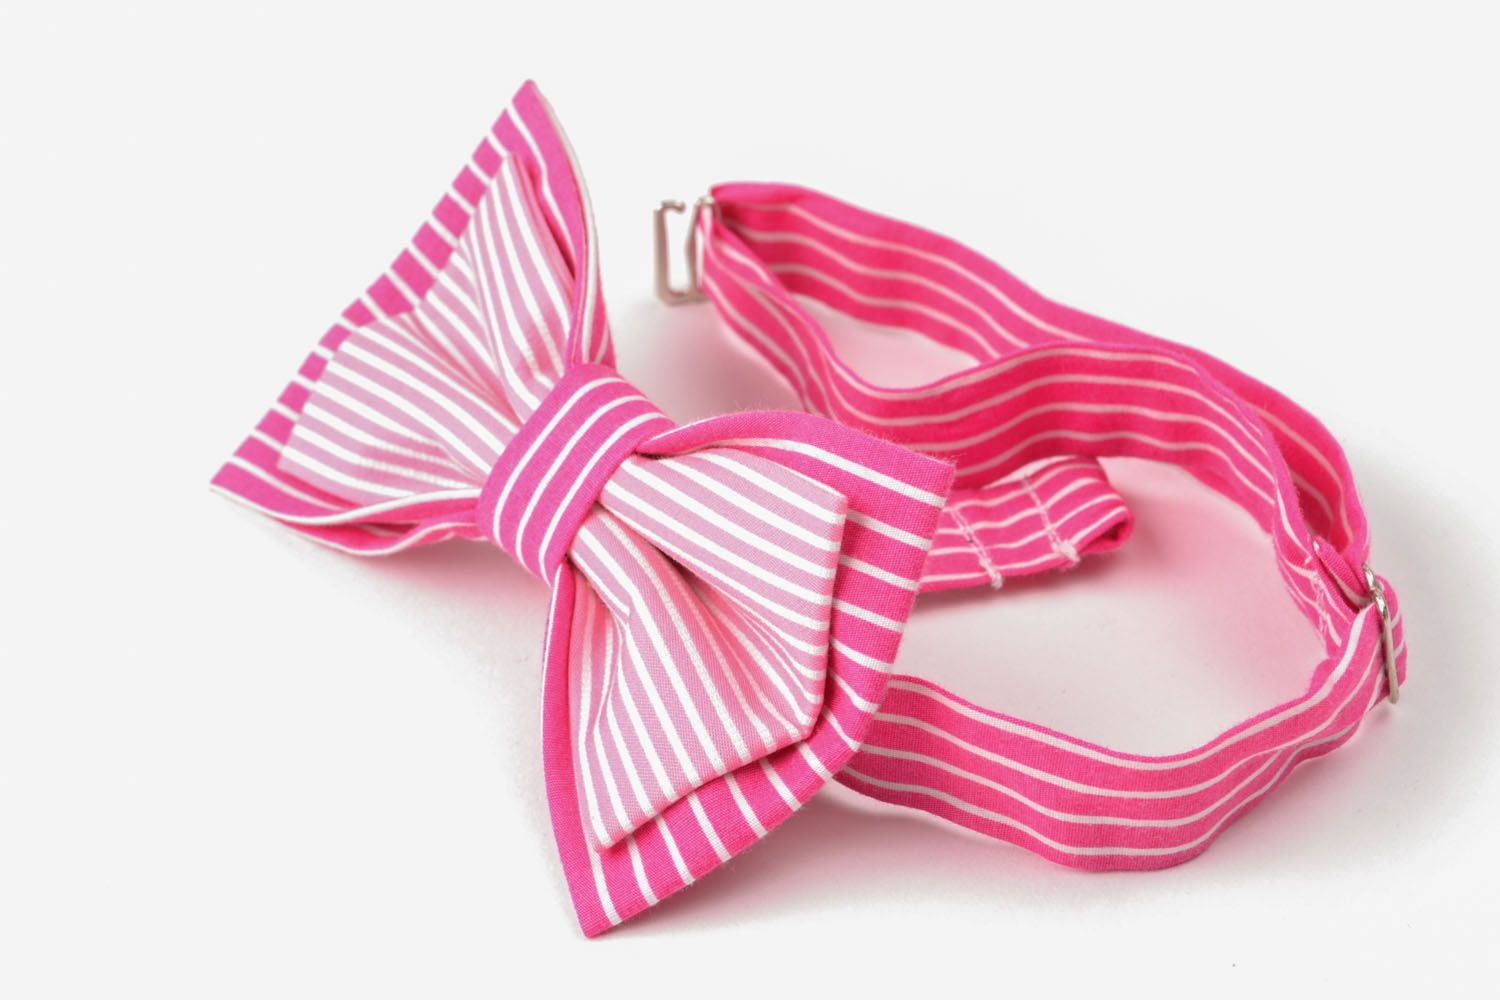 Bright-pink bow tie photo 1